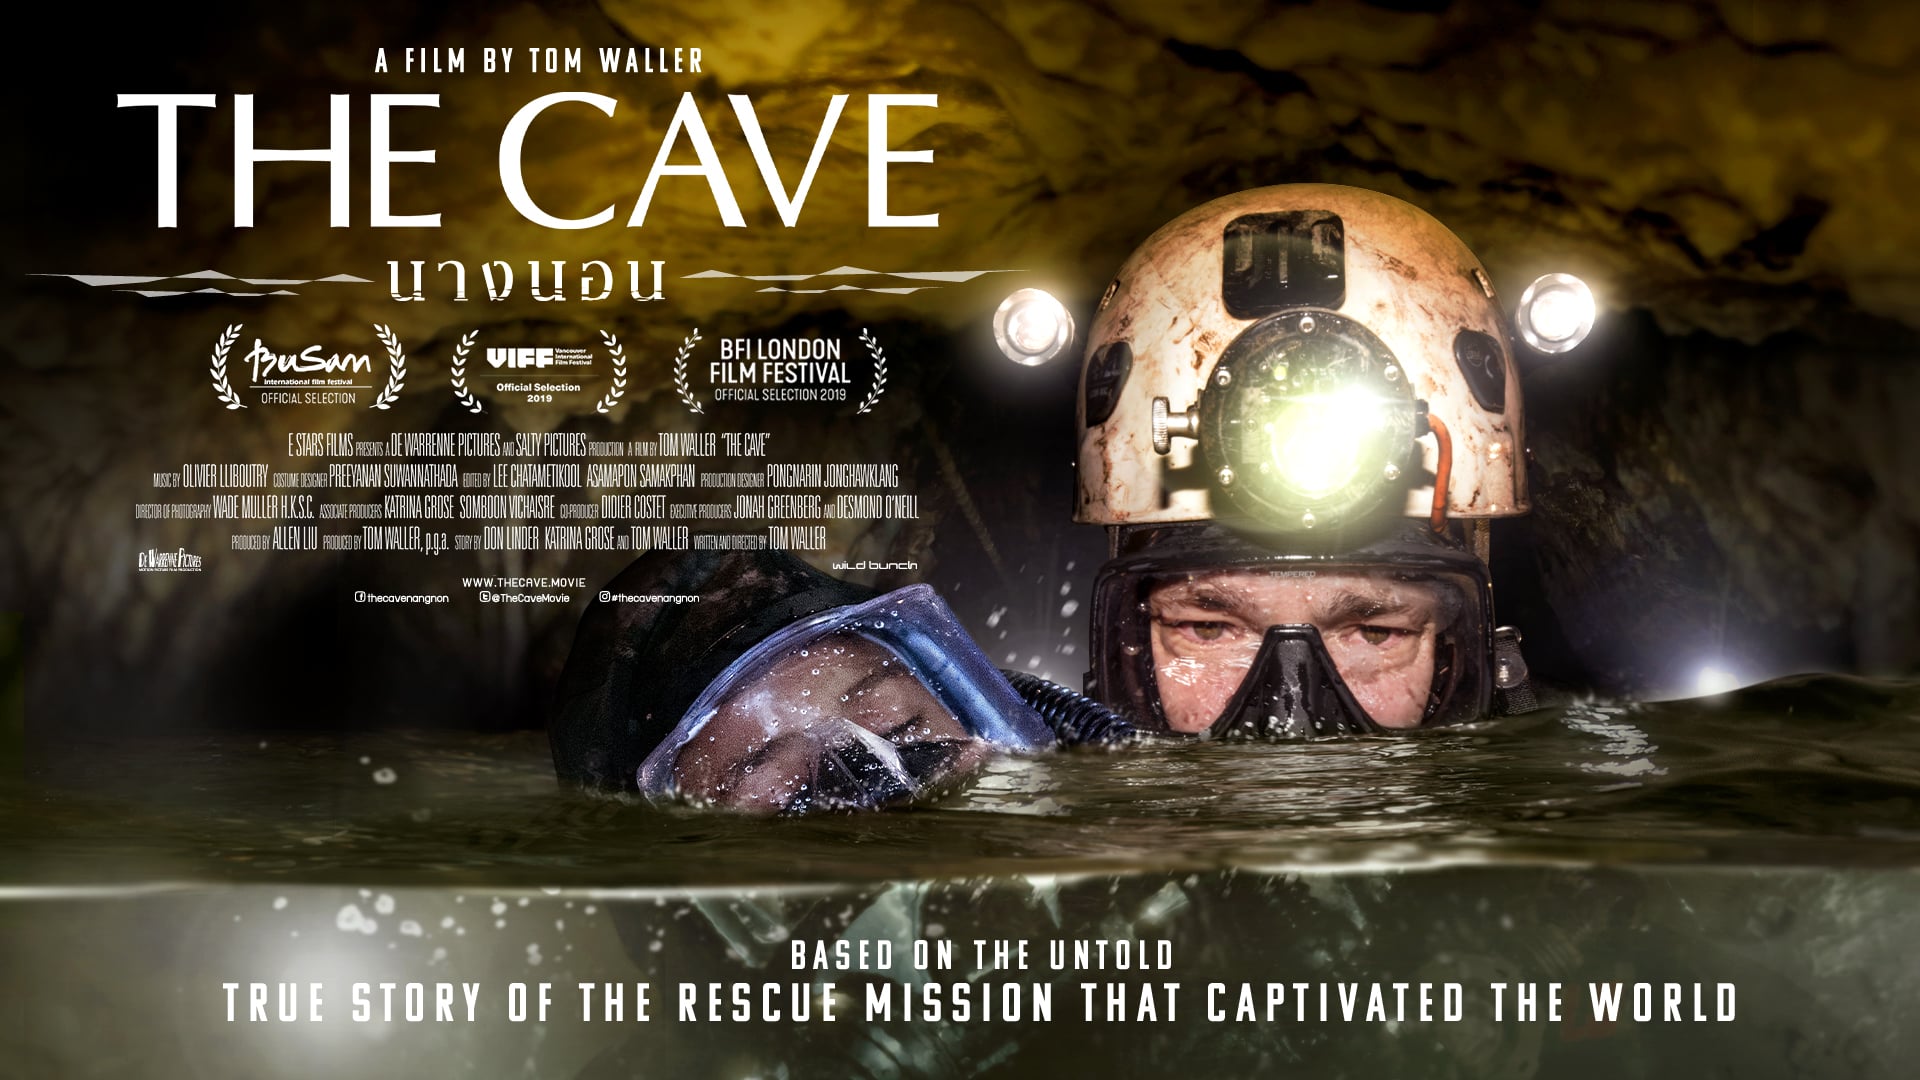 THE CAVE by Tom Waller (Thailand, 2019) | Official Trailer (EN)